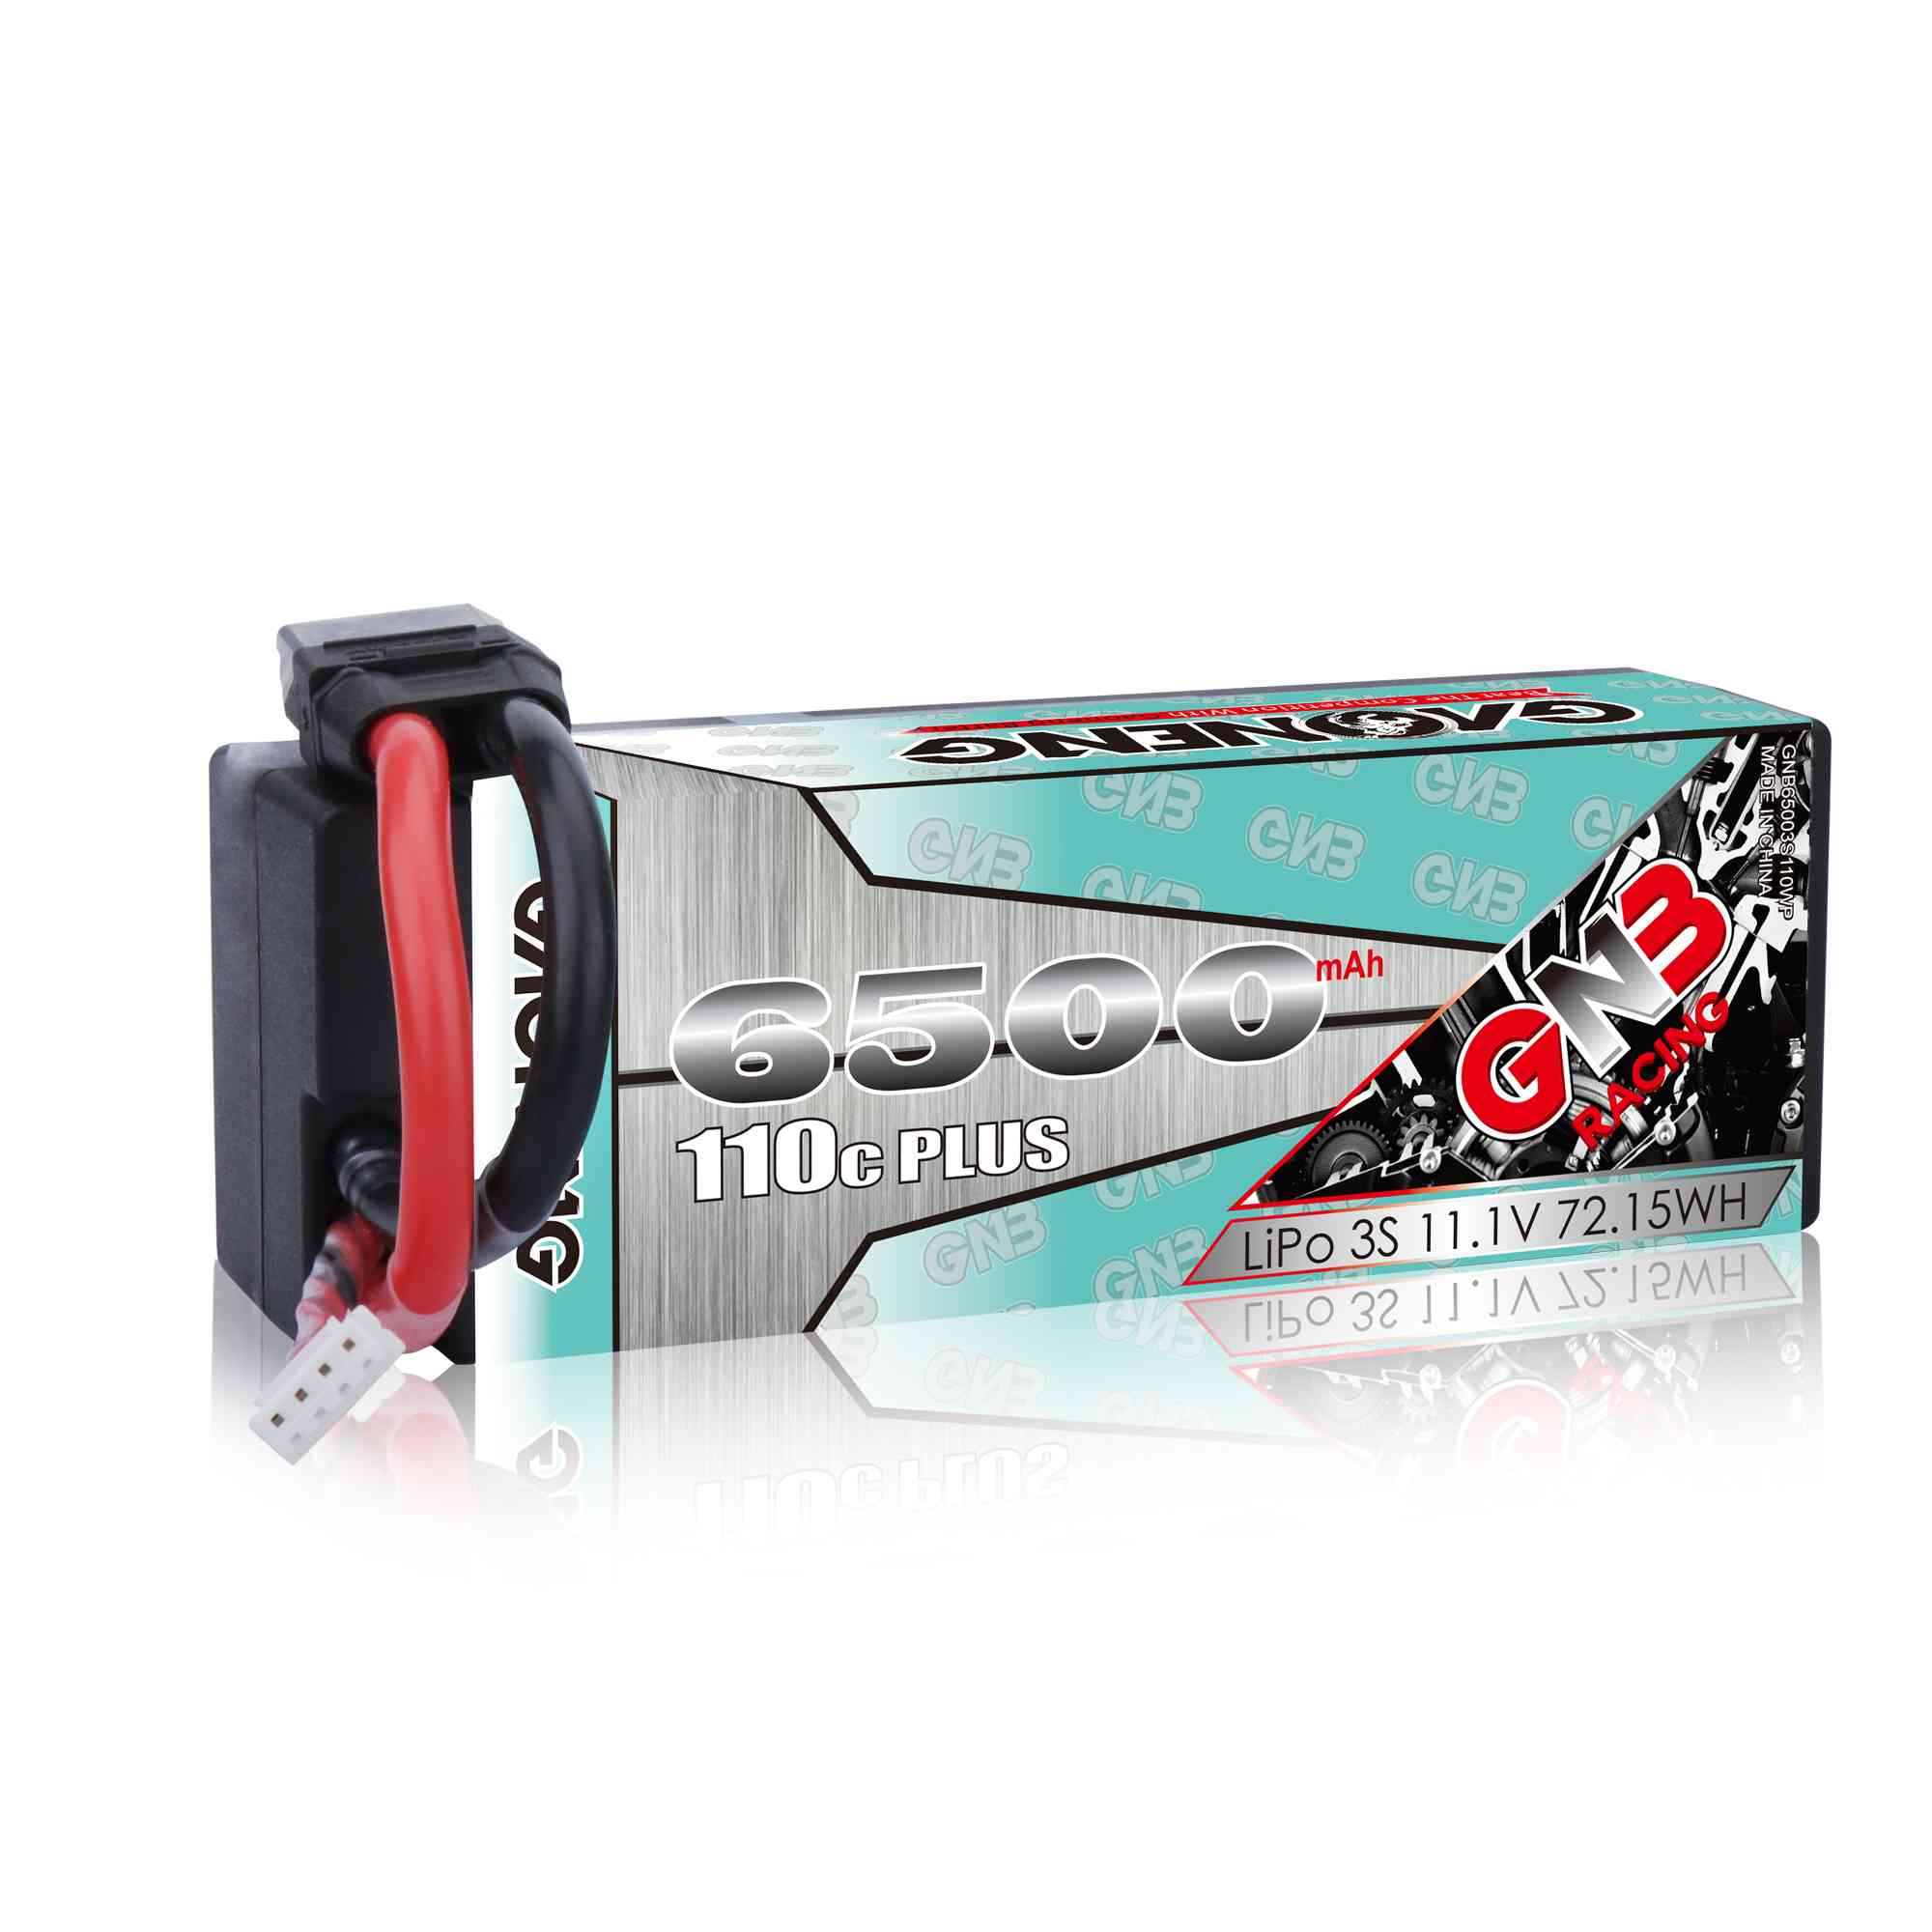 GNB GAONENG LiPo Battery 6500MAH 3S2P Black Balance 11.1V 110C PLUS hardcase cabled with Red T-PLUG